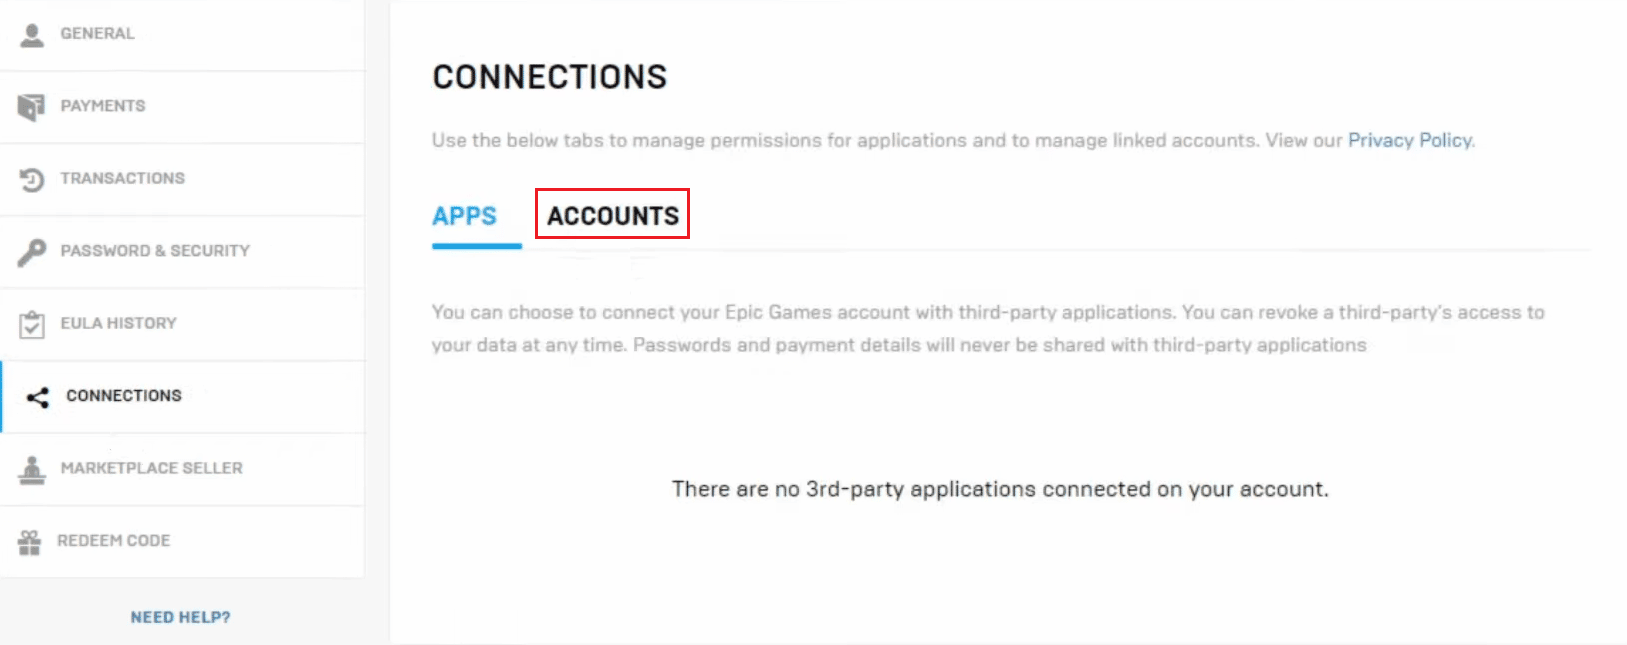 switch to the ACCOUNTS section